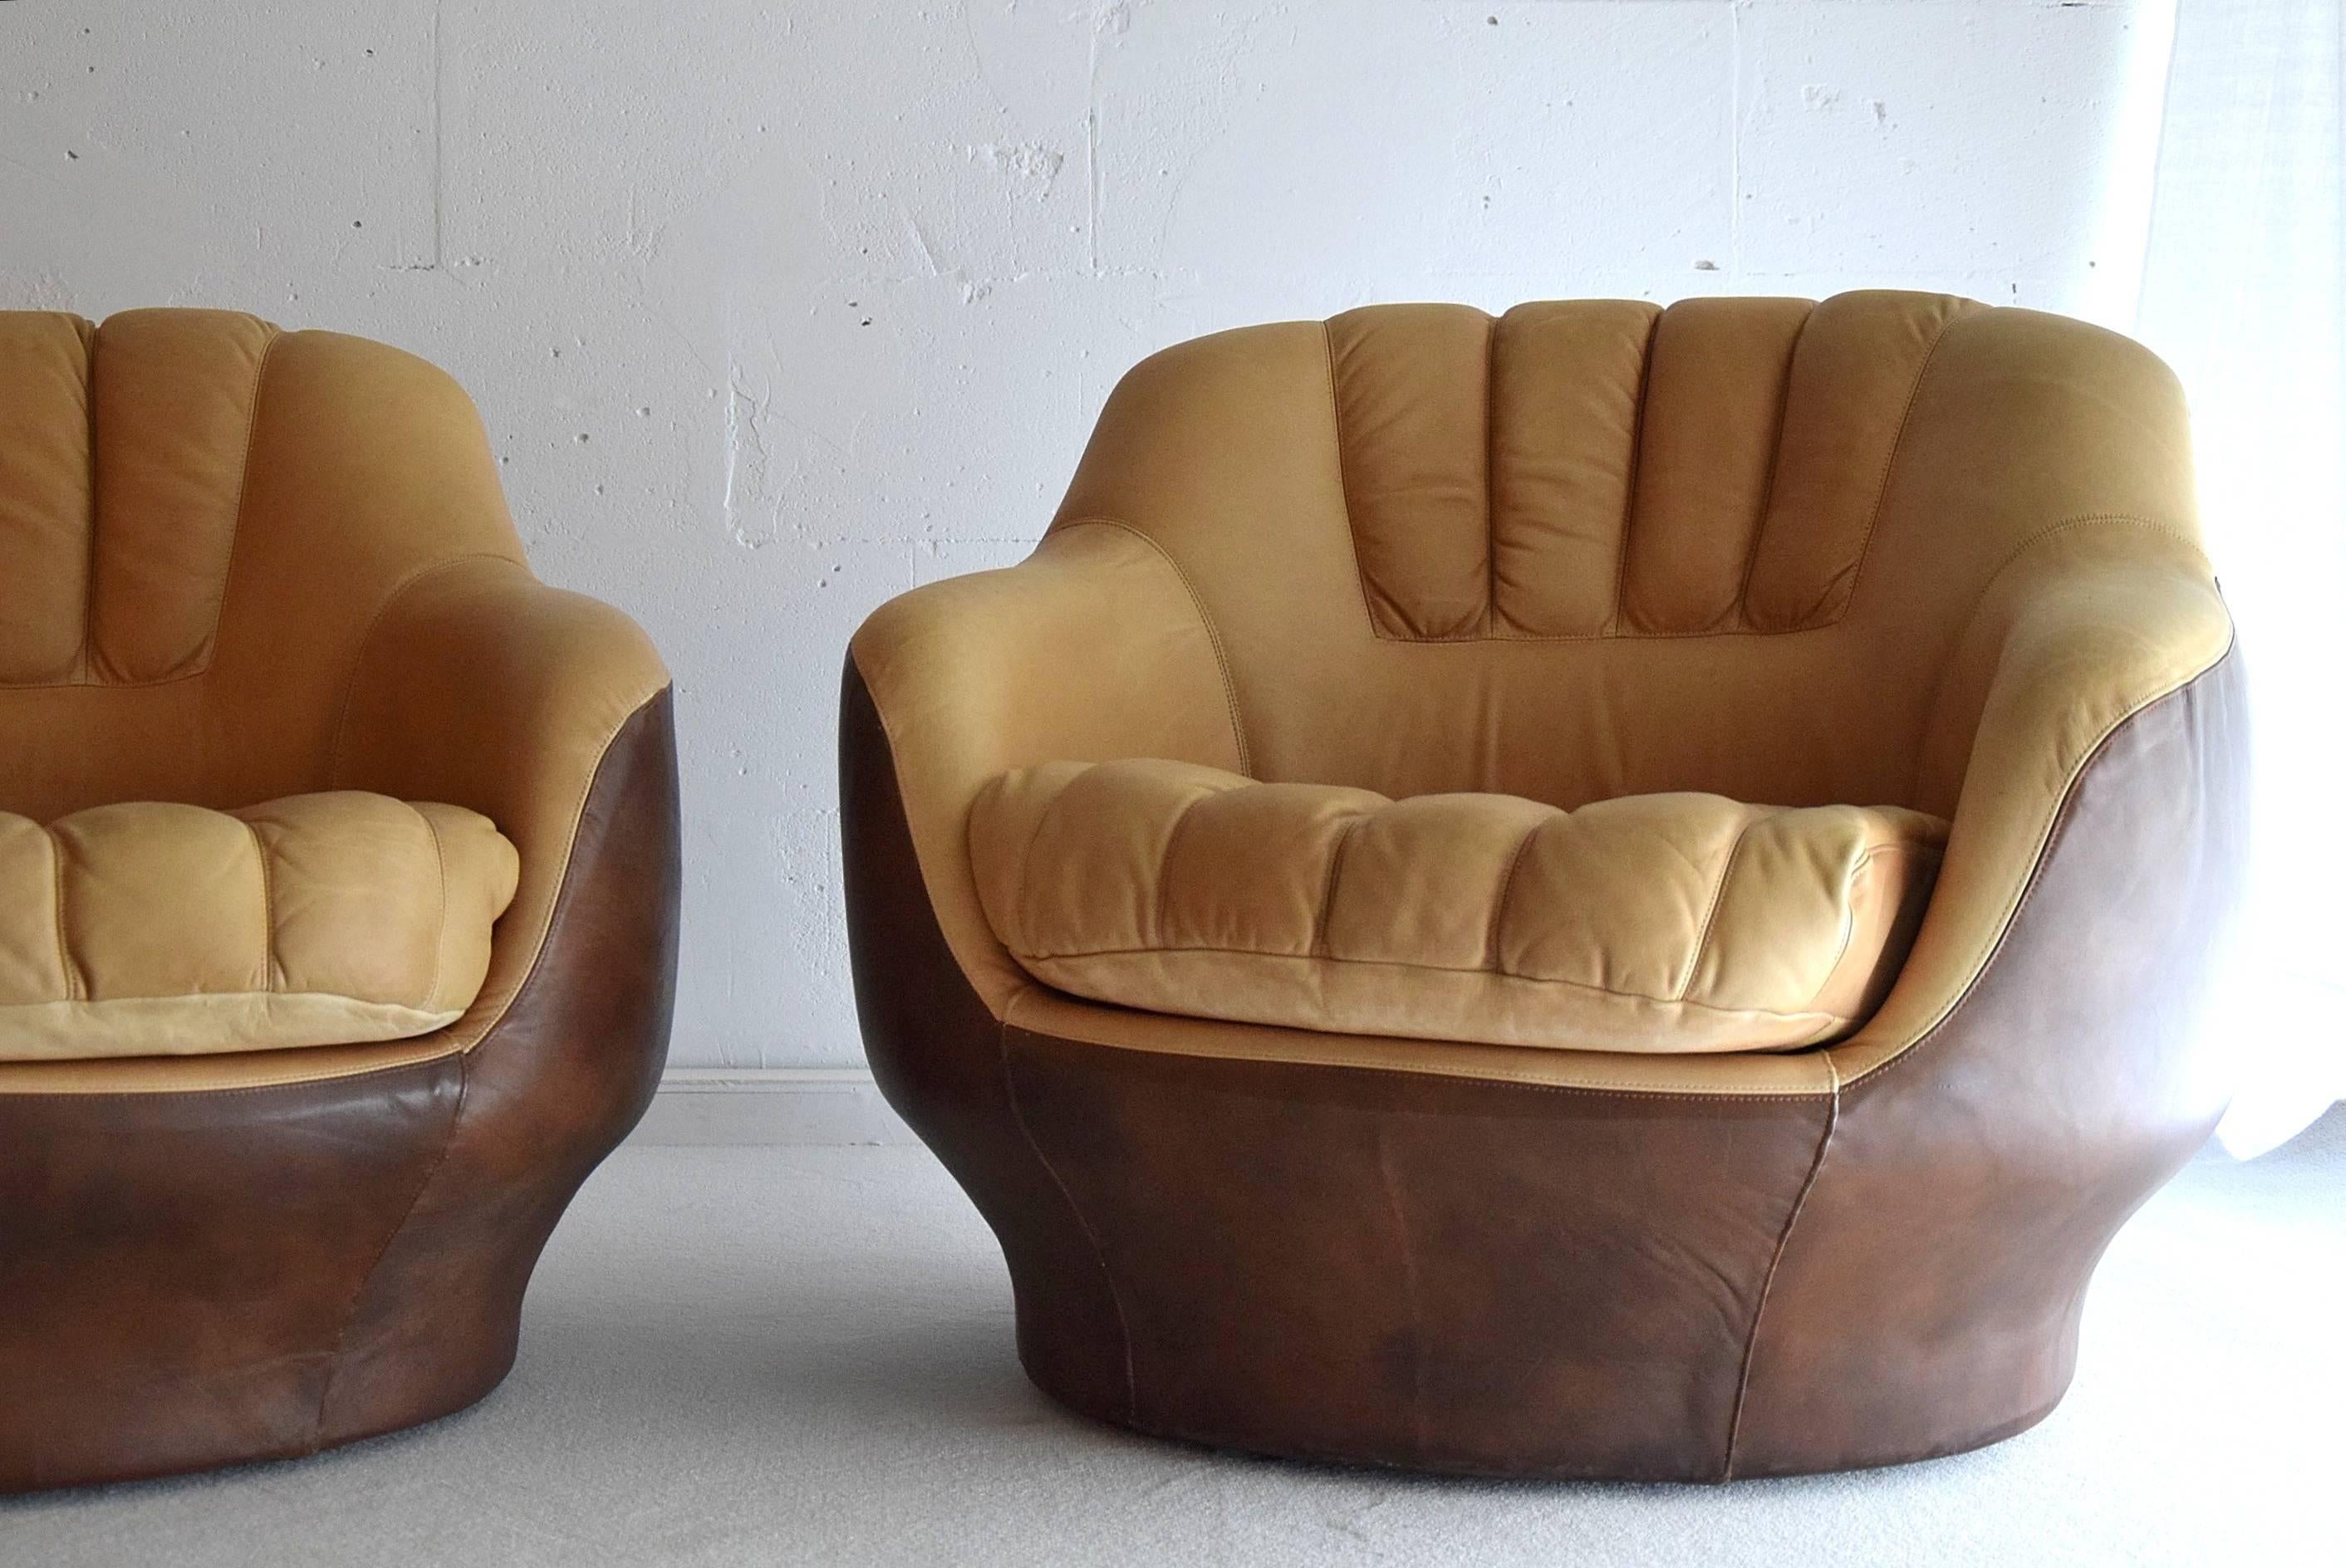 Late 20th Century Mid Century Modern Lounge Chairs in the Style of the Sede